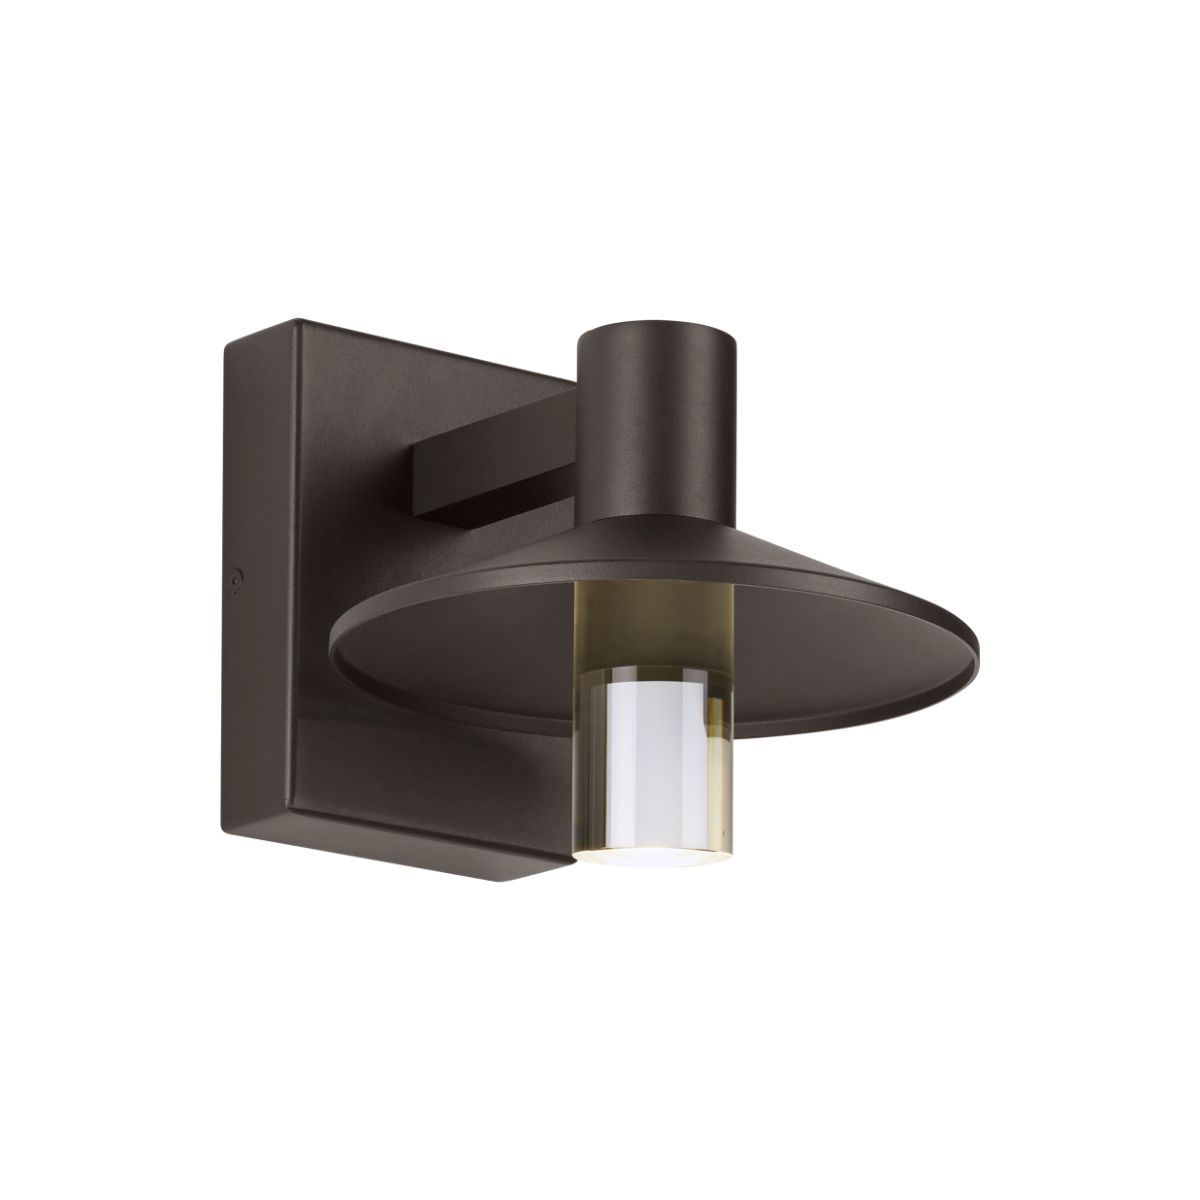 Ash 8 In. LED Hi-Output Outdoor Wall Sconce 1189 Lumens 2700K - Bees Lighting